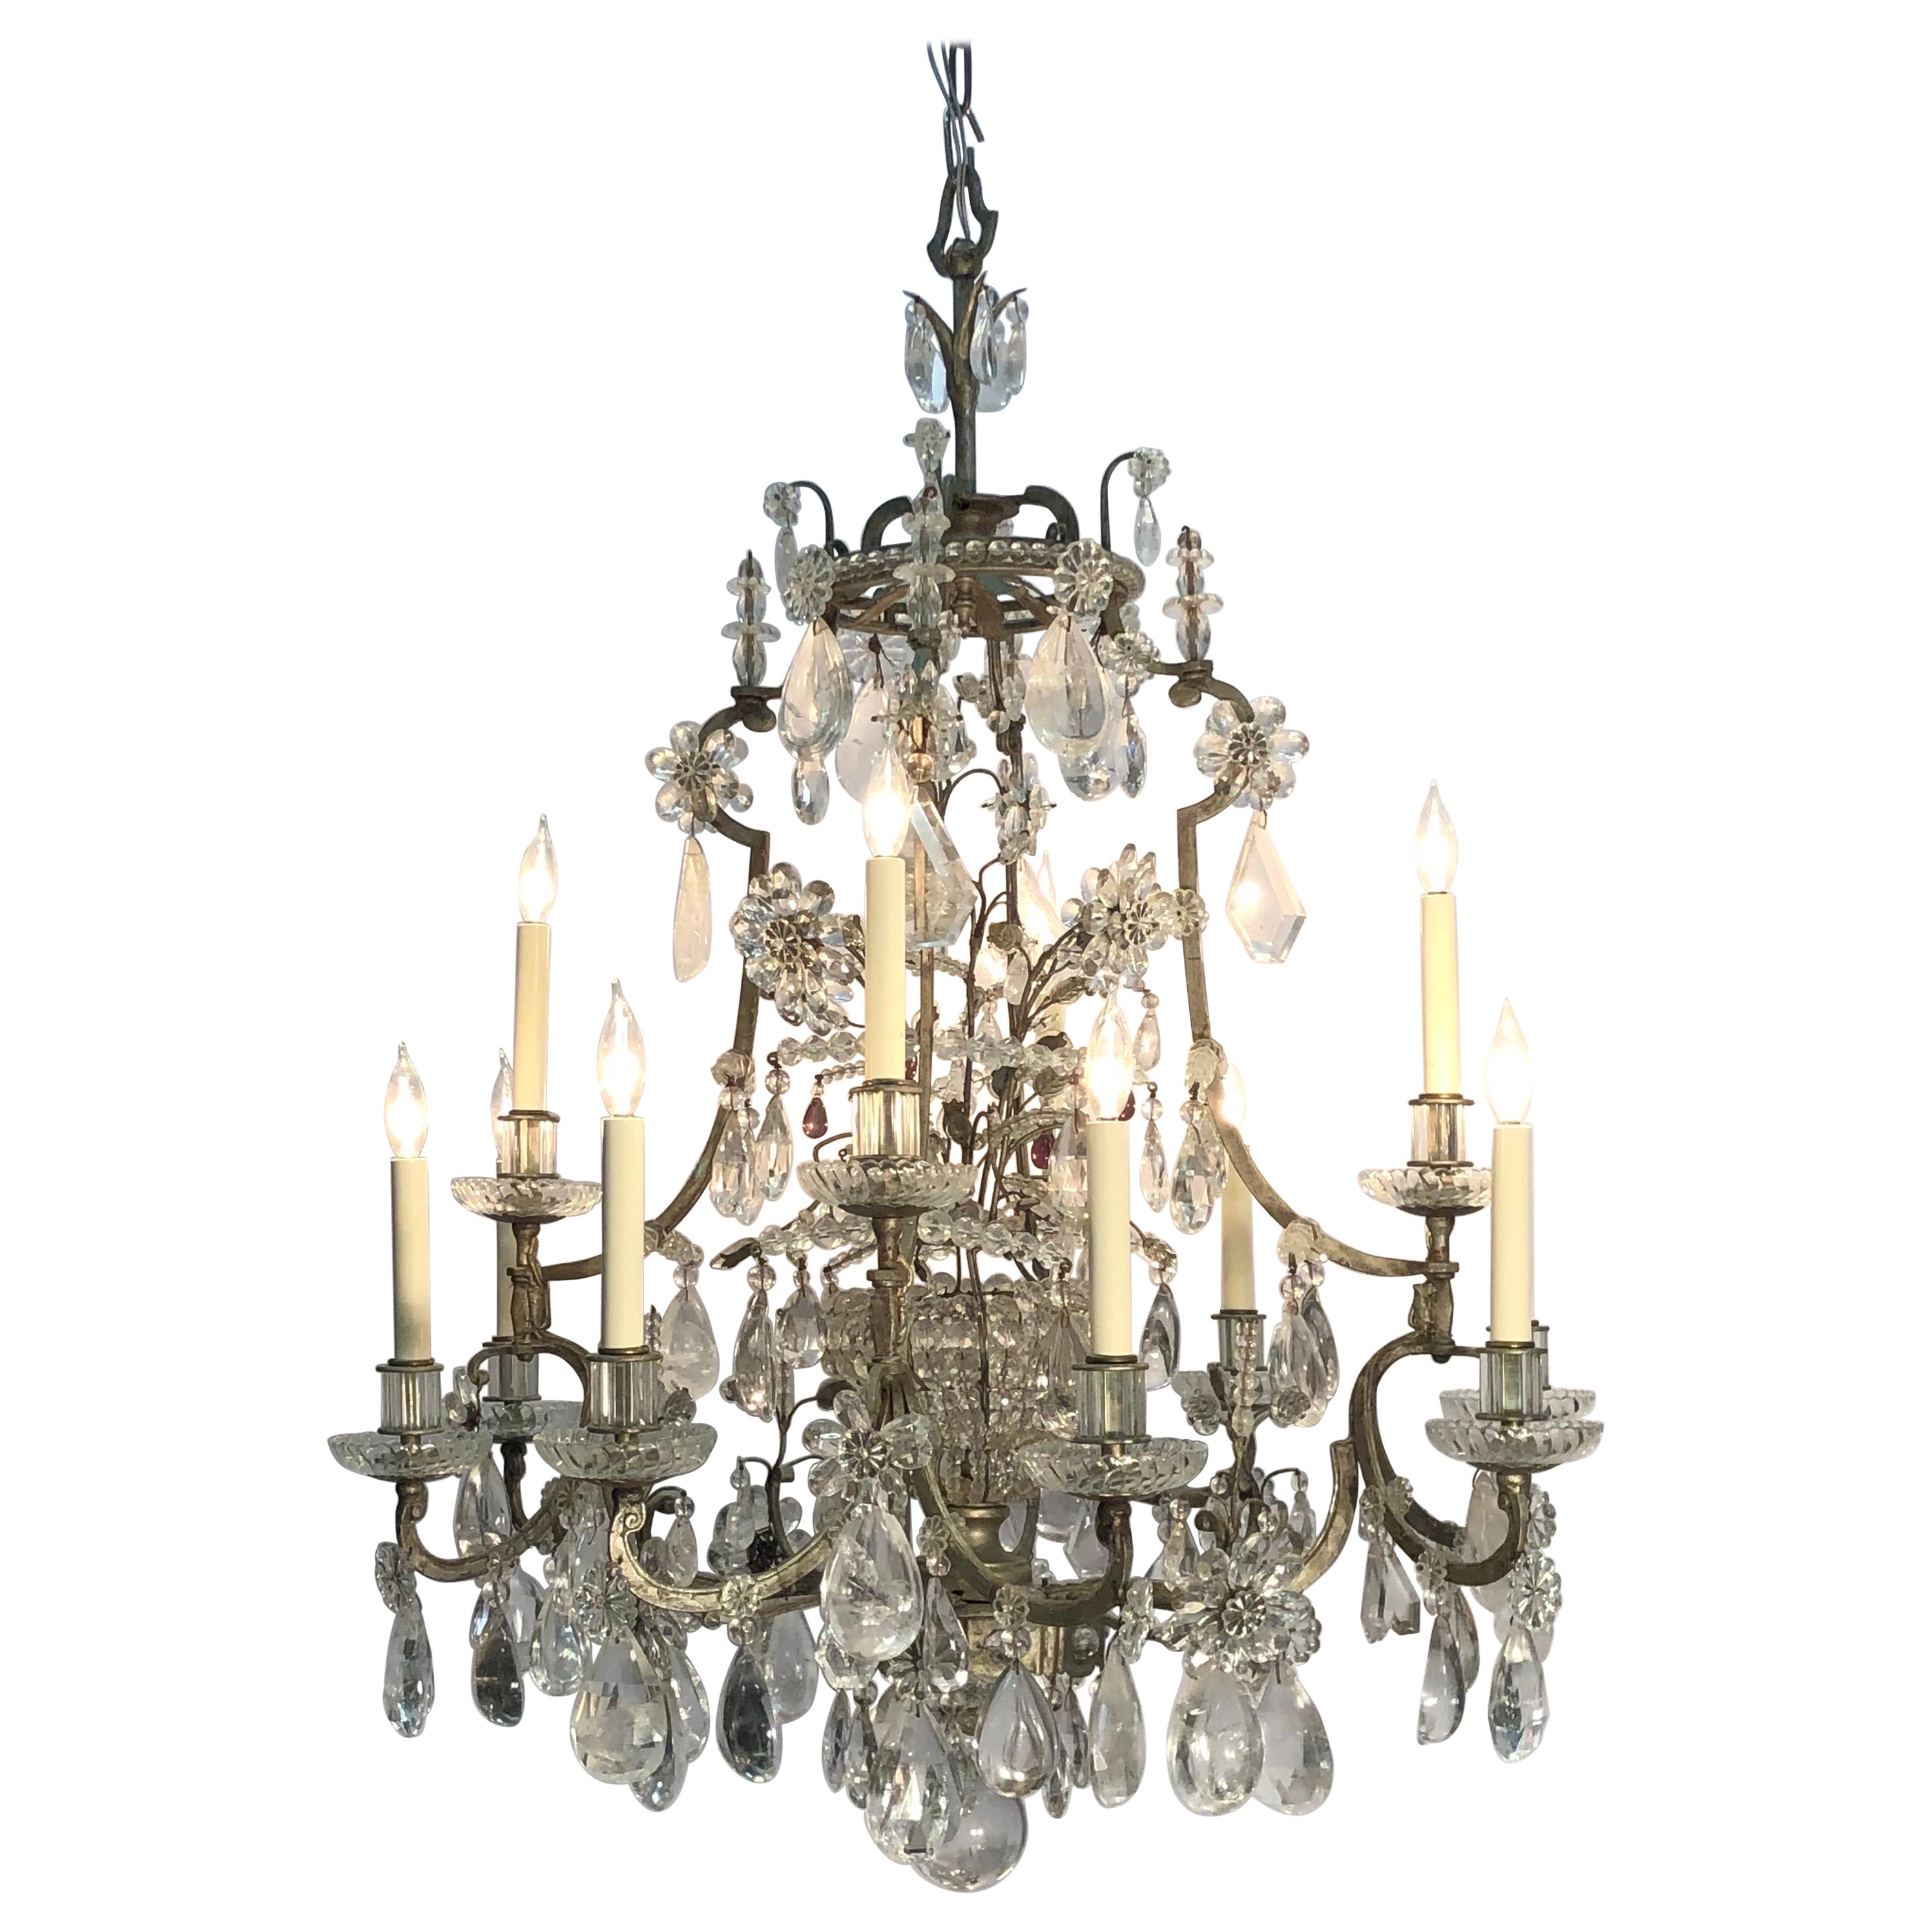 Maison Baguès attributed, Wrought Iron Rock Crystal 12 Light Chandelier For Sale